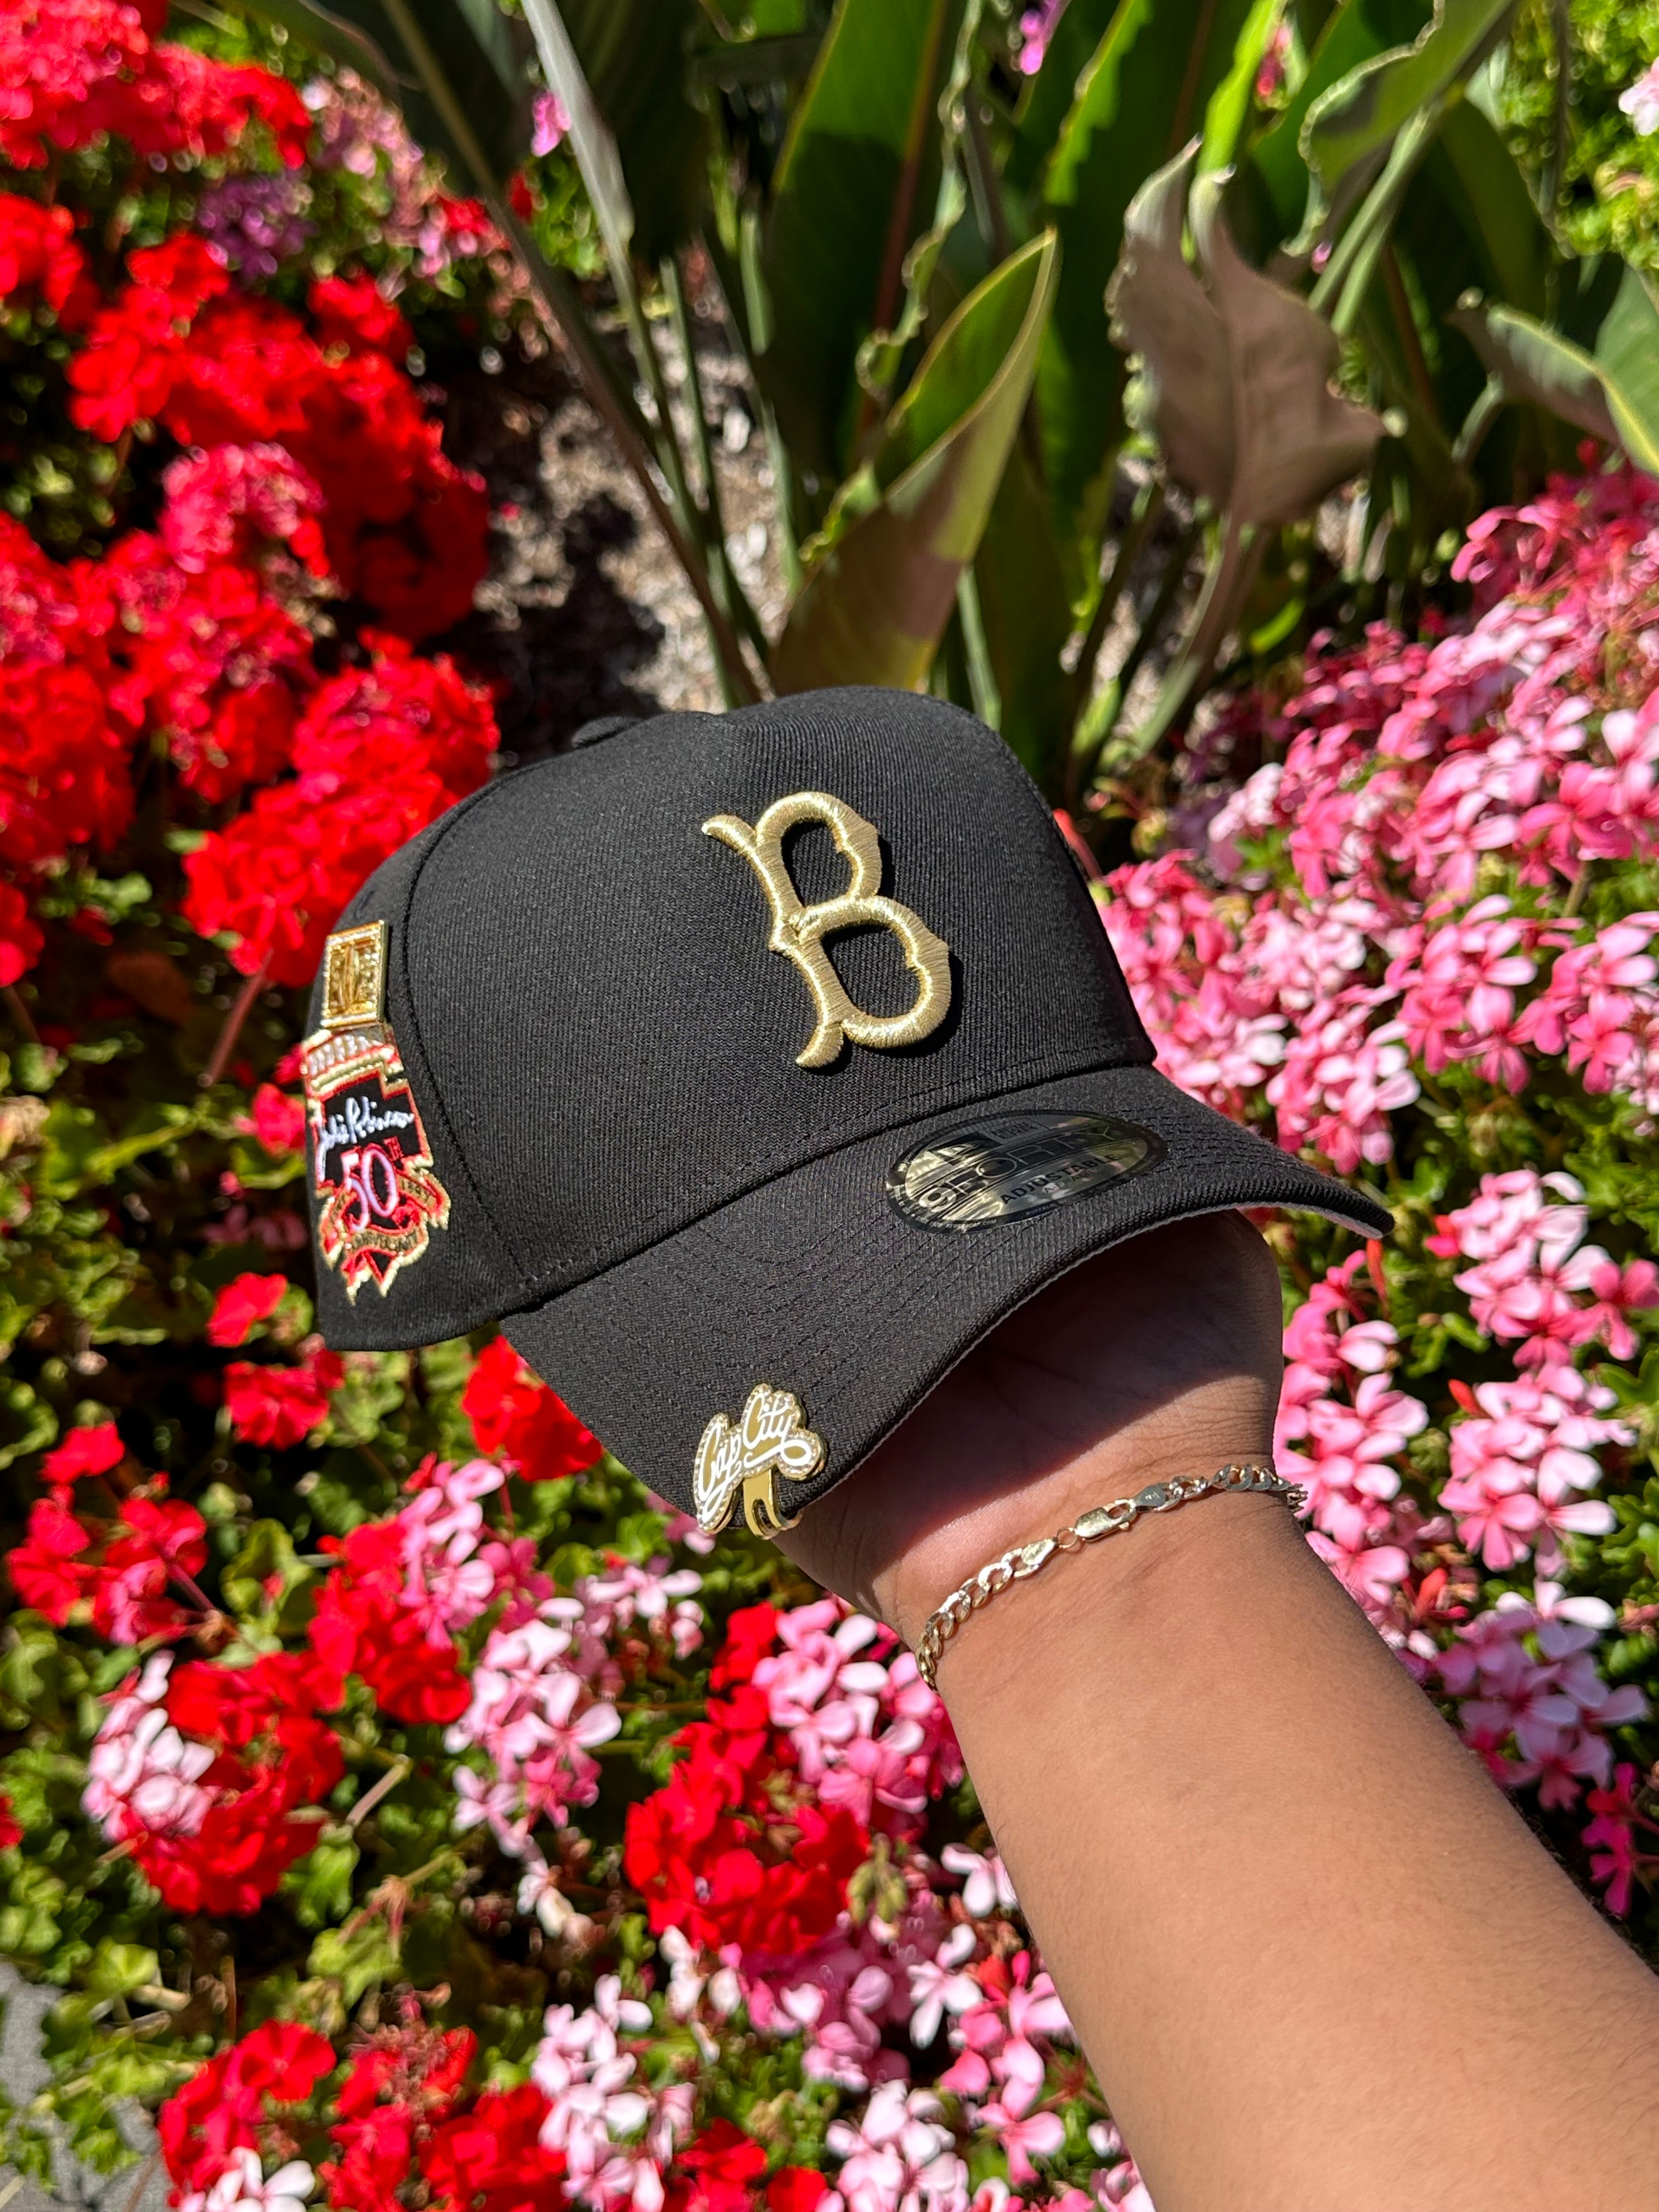 NEW ERA EXCLUSIVE 9FORTY A-FRAME BLACK BROOKLYN DODGERS ADJUSTABLE W/ "JACKIE ROBINSON" SIDE PATCH